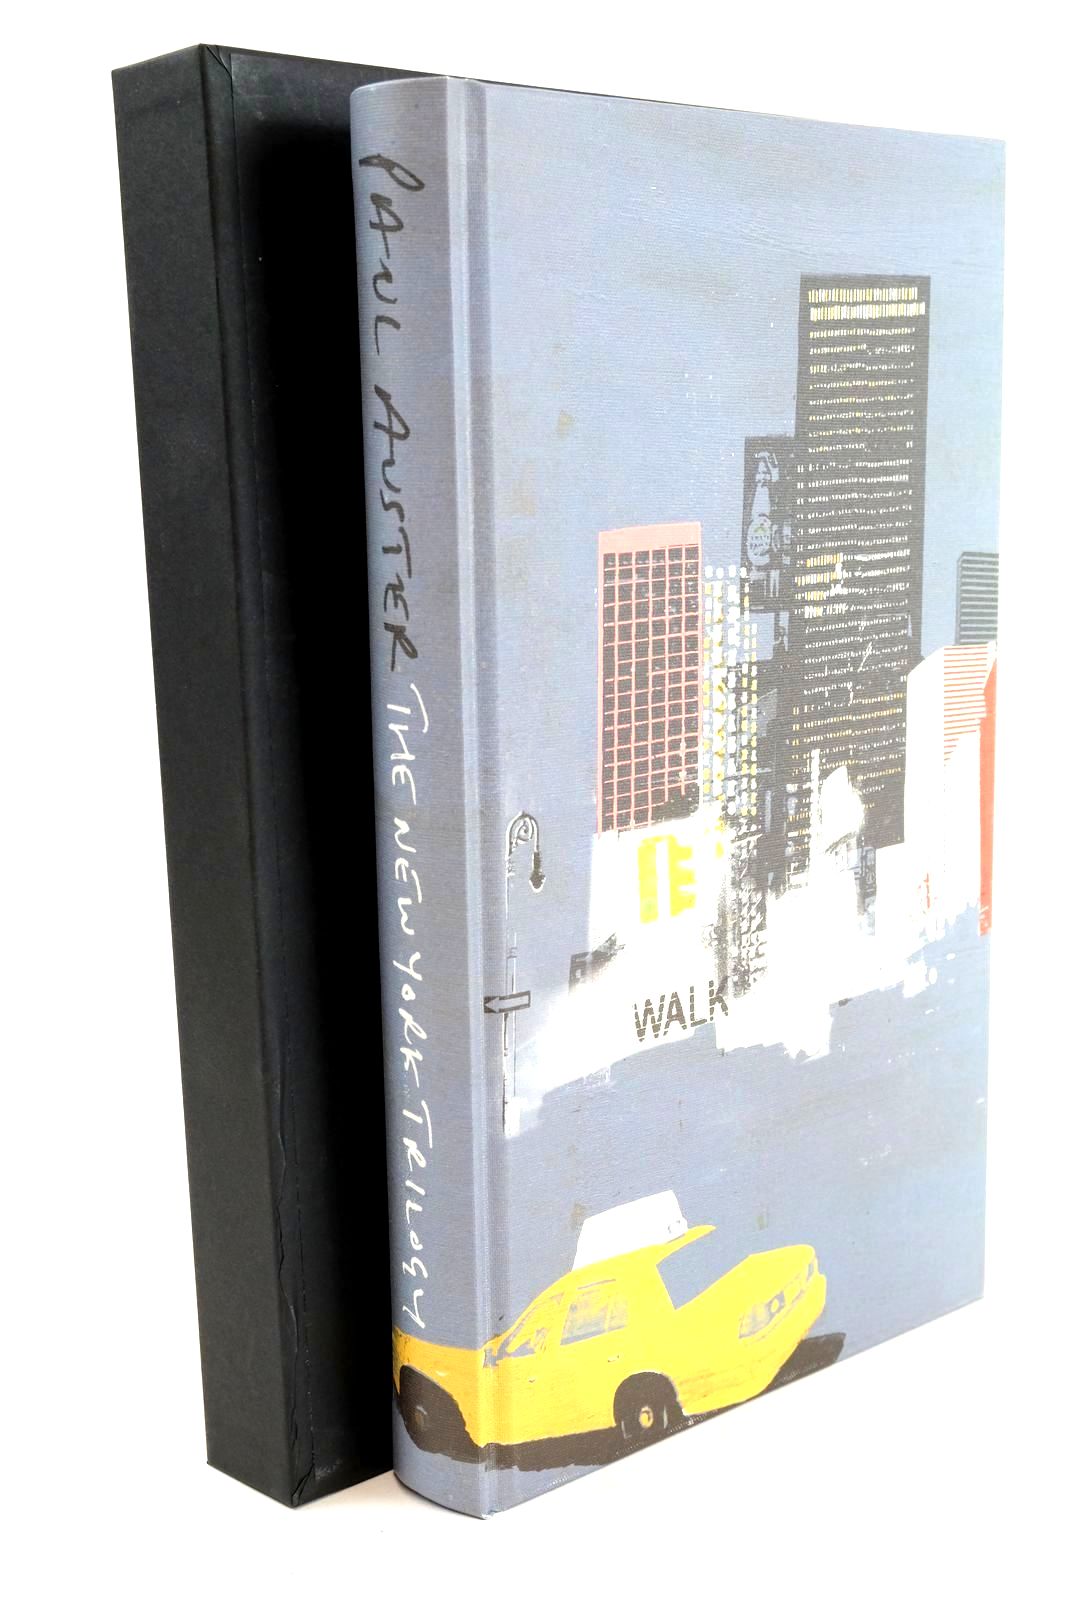 Photo of THE NEW YORK TRILOGY written by Auster, Paul illustrated by Burns, Tom published by Folio Society (STOCK CODE: 1325179)  for sale by Stella & Rose's Books